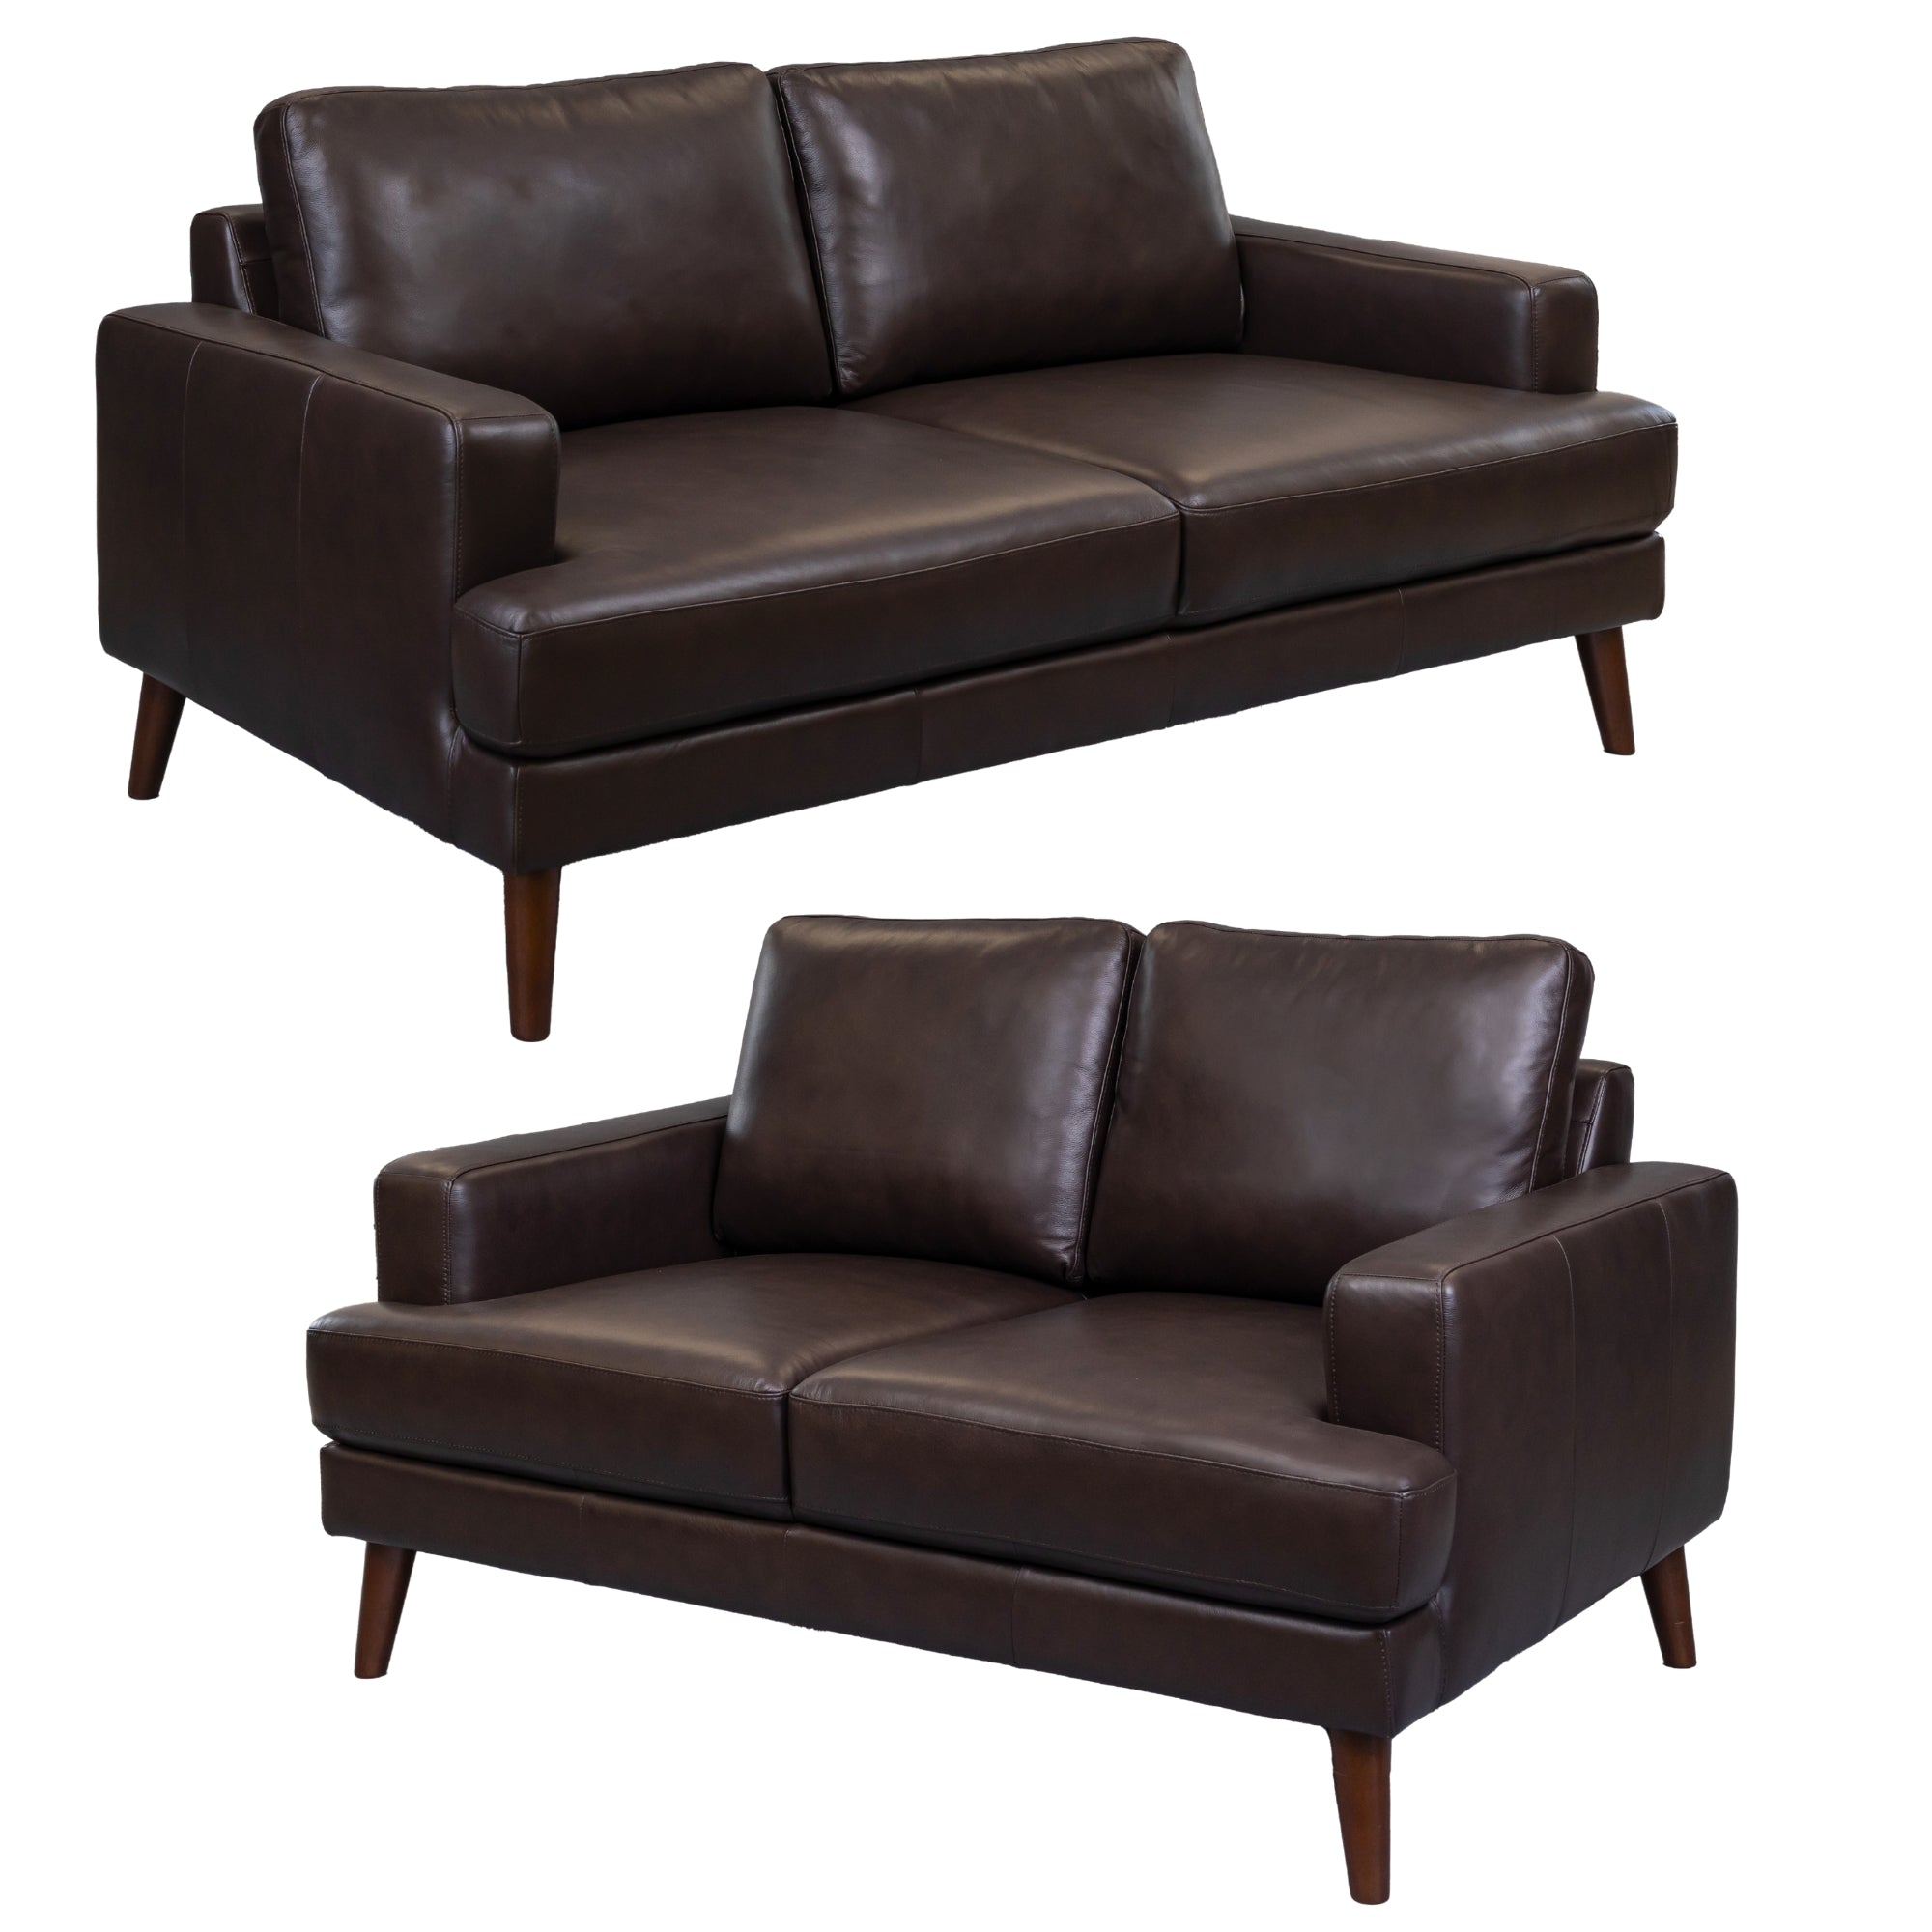 Modern Chocolate Leather 3+2 Seater Sofa Set with Rubberwood Legs